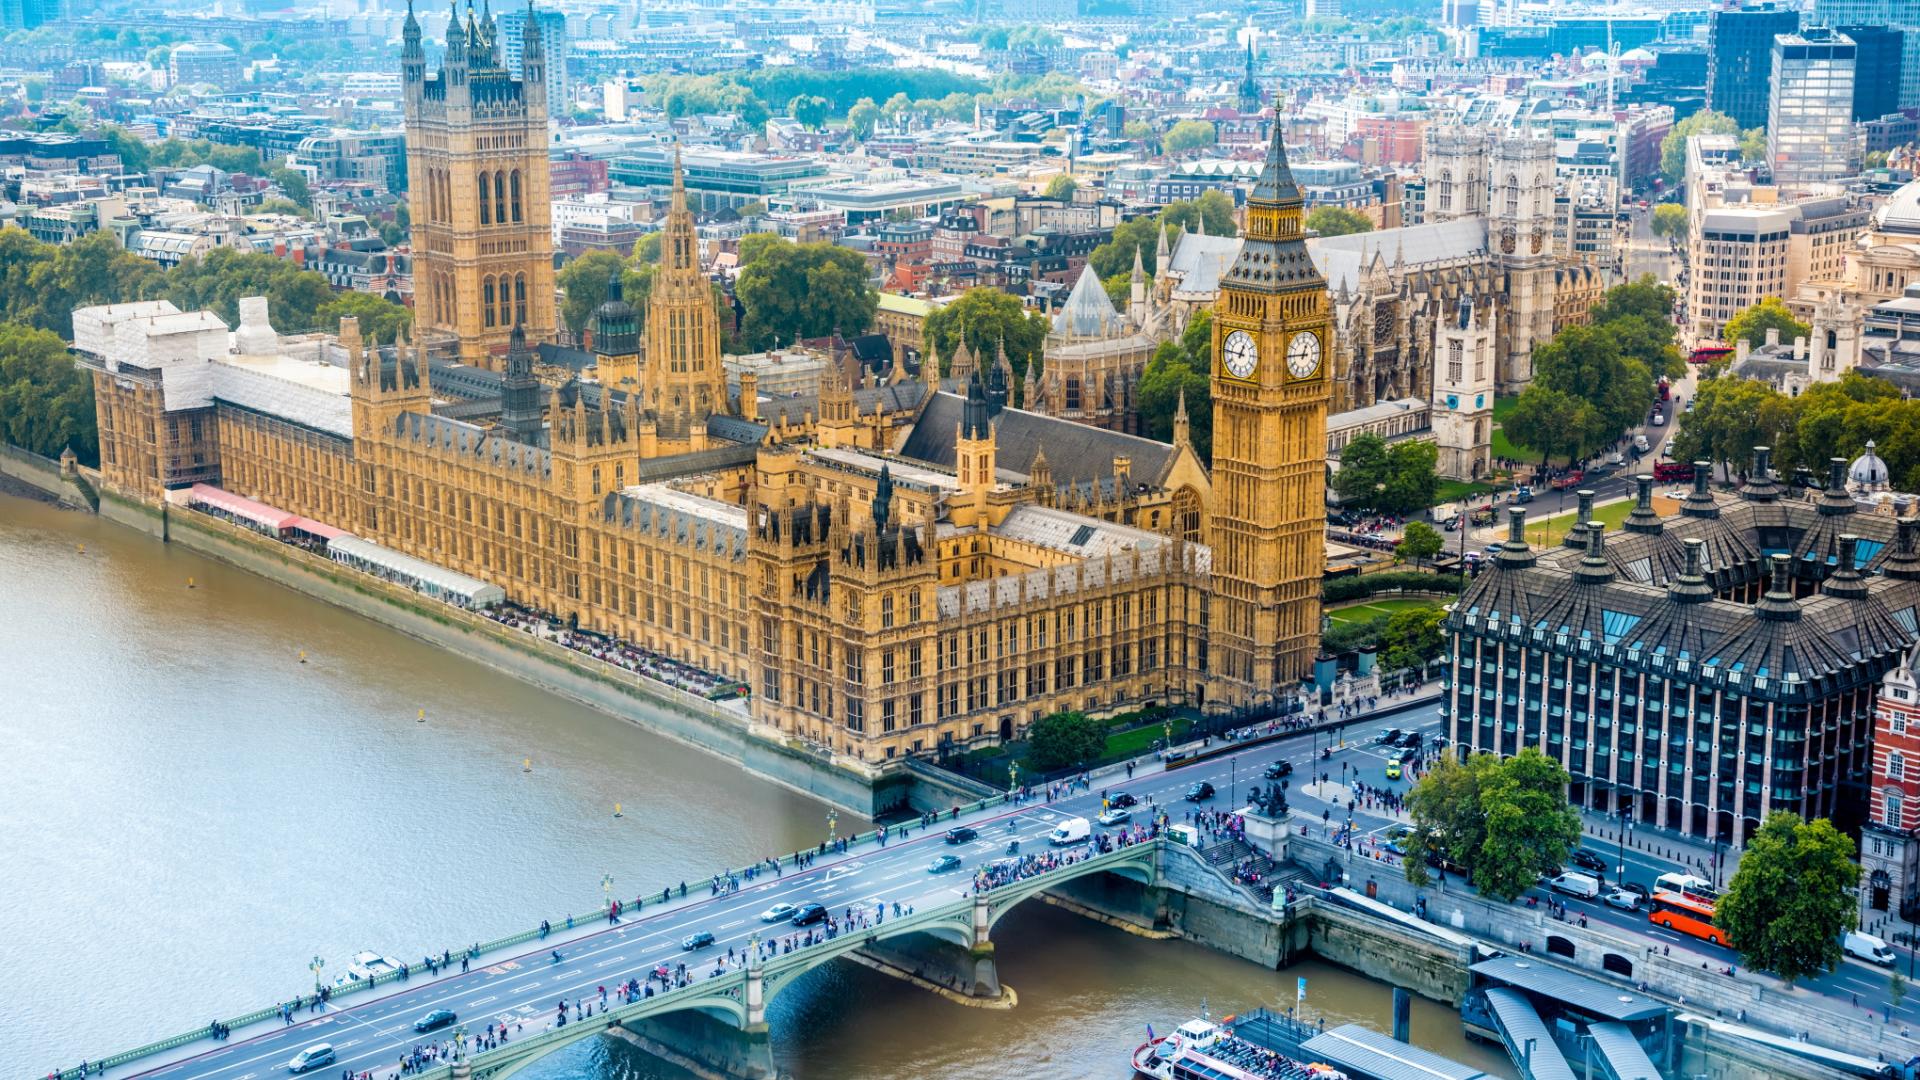 A photo of the UK parliament from above